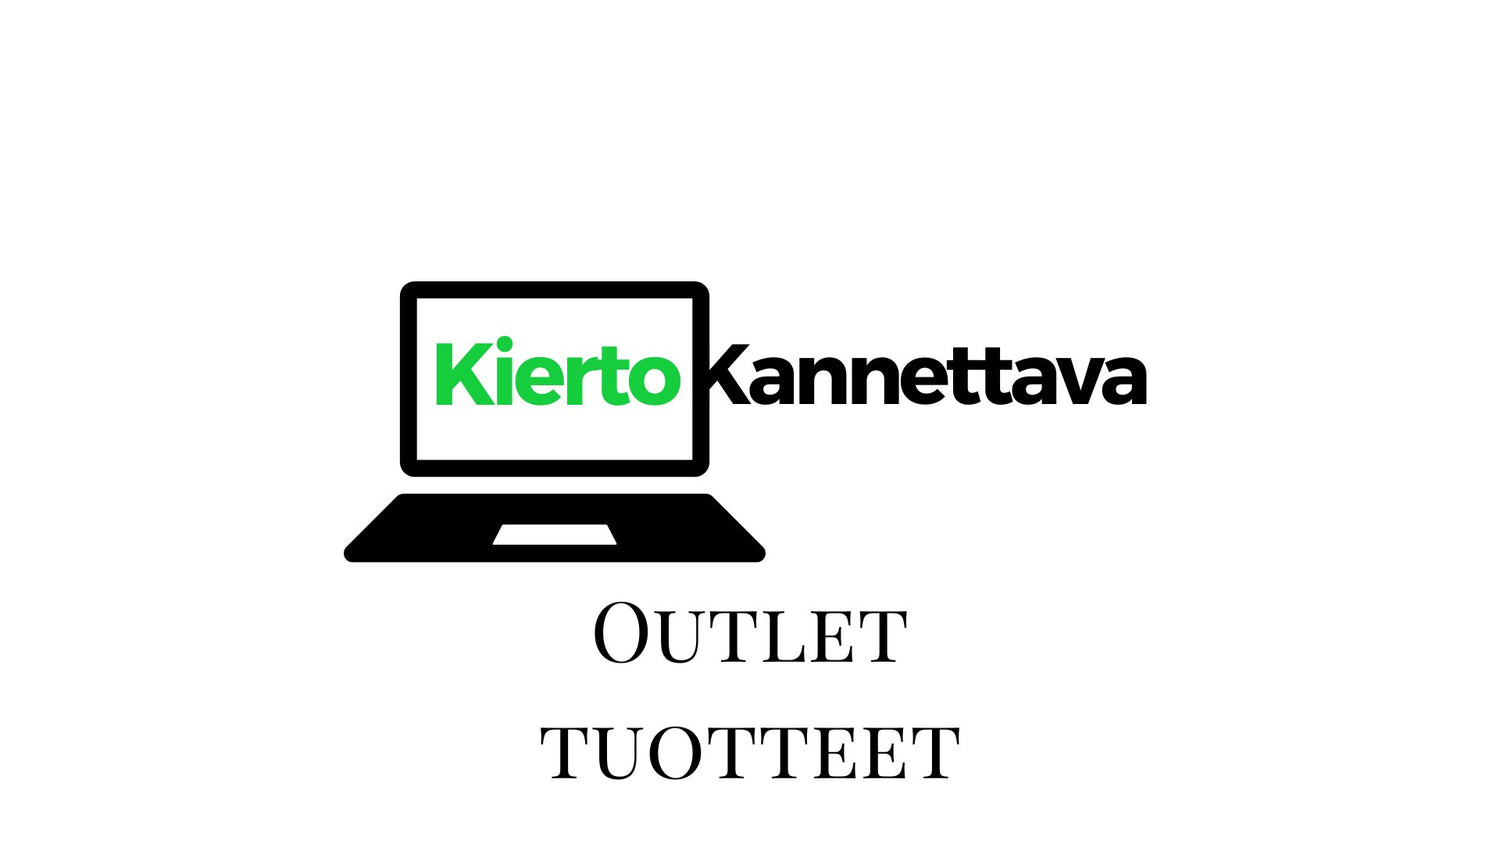 Outlet tuotteet